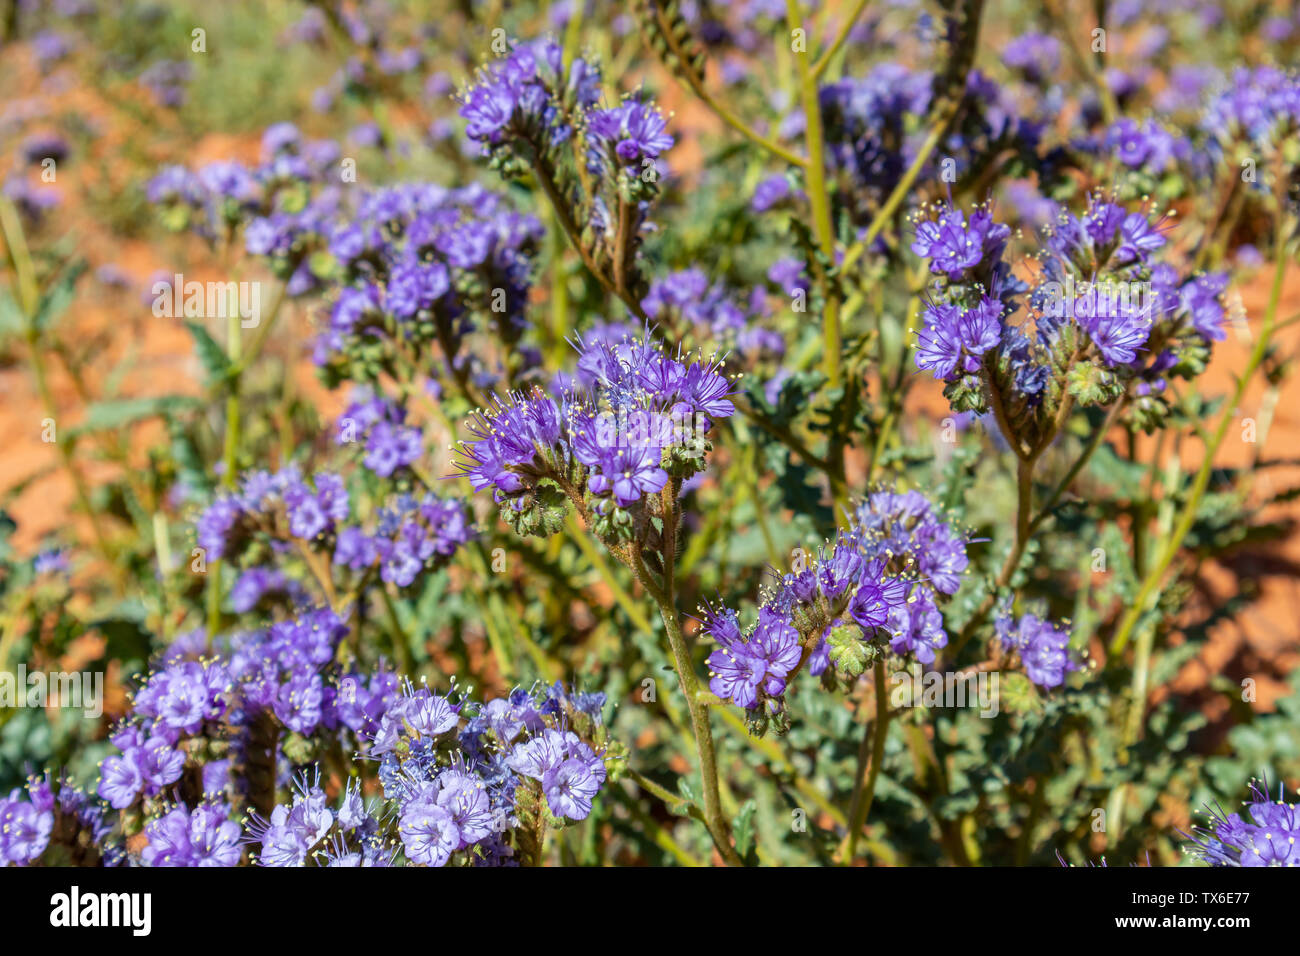 Desert purple, blue wild flower. Phacelia blooming plant against red sand background. Monument Valley Navajo Tribal Park, USA Stock Photo